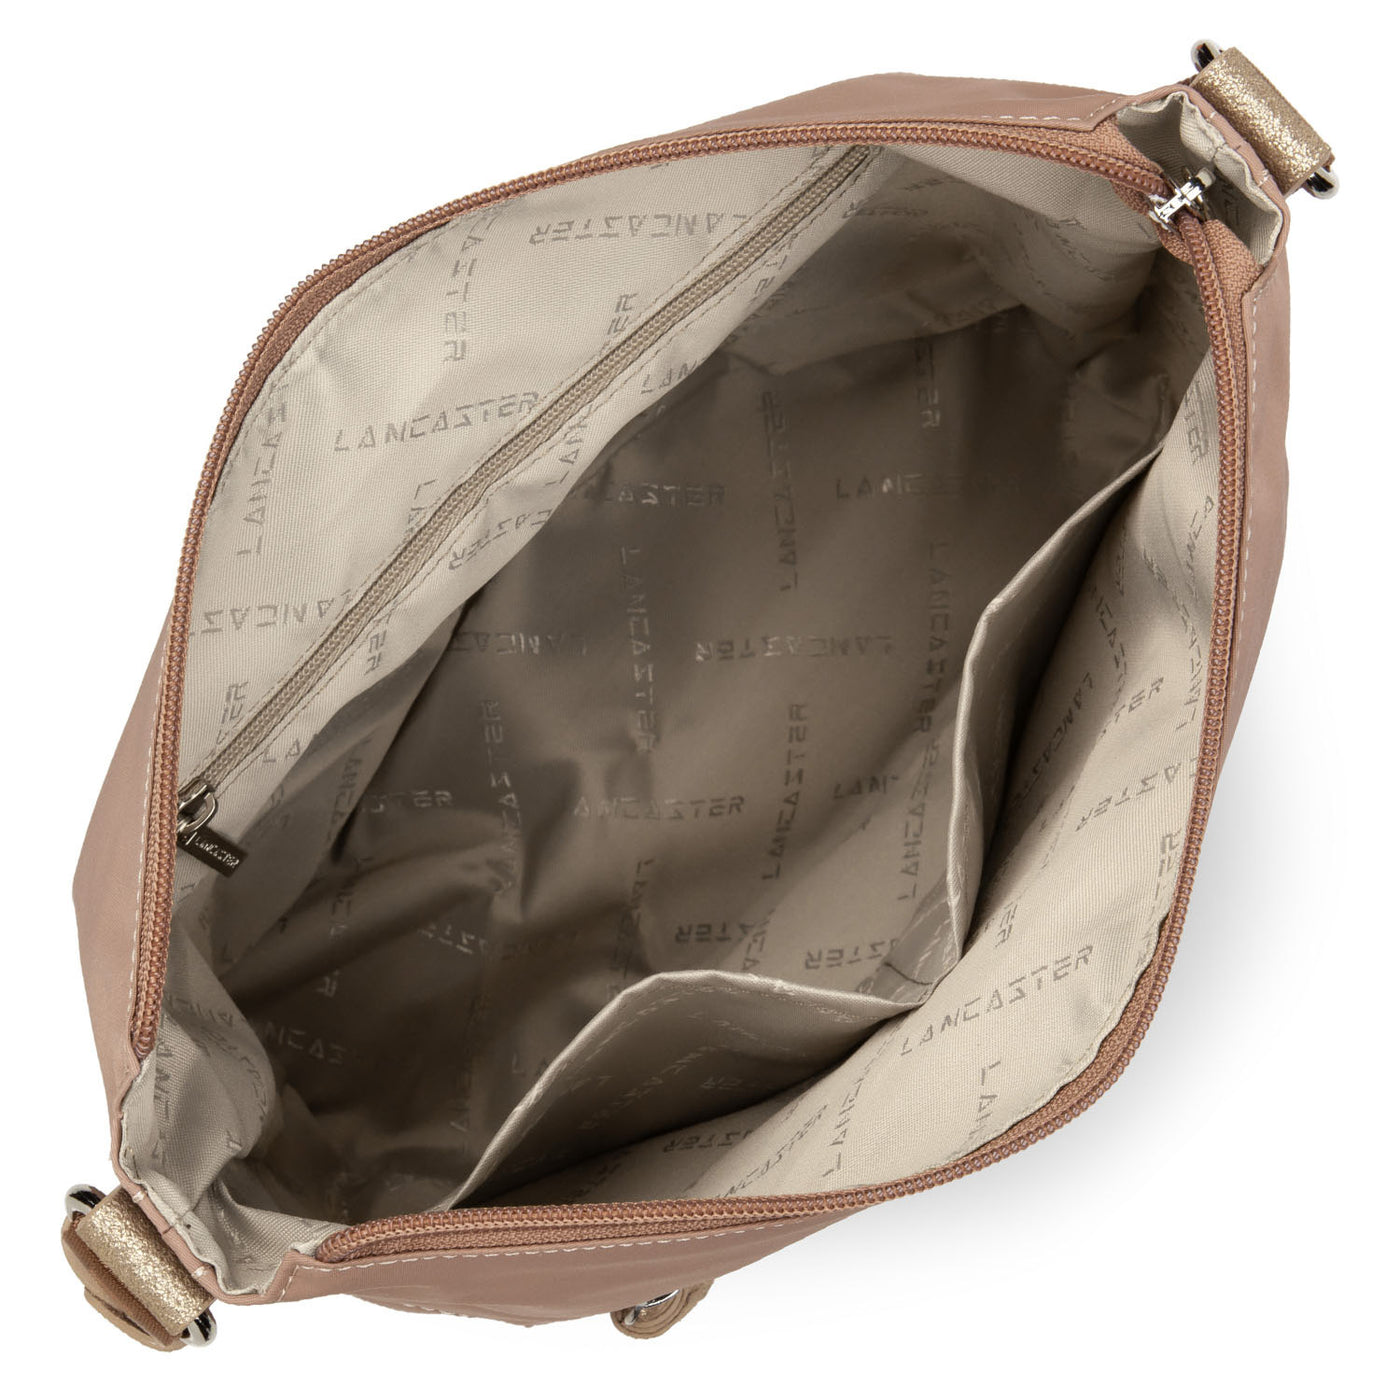 sac besace - basic pompon #couleur_nude-champagne